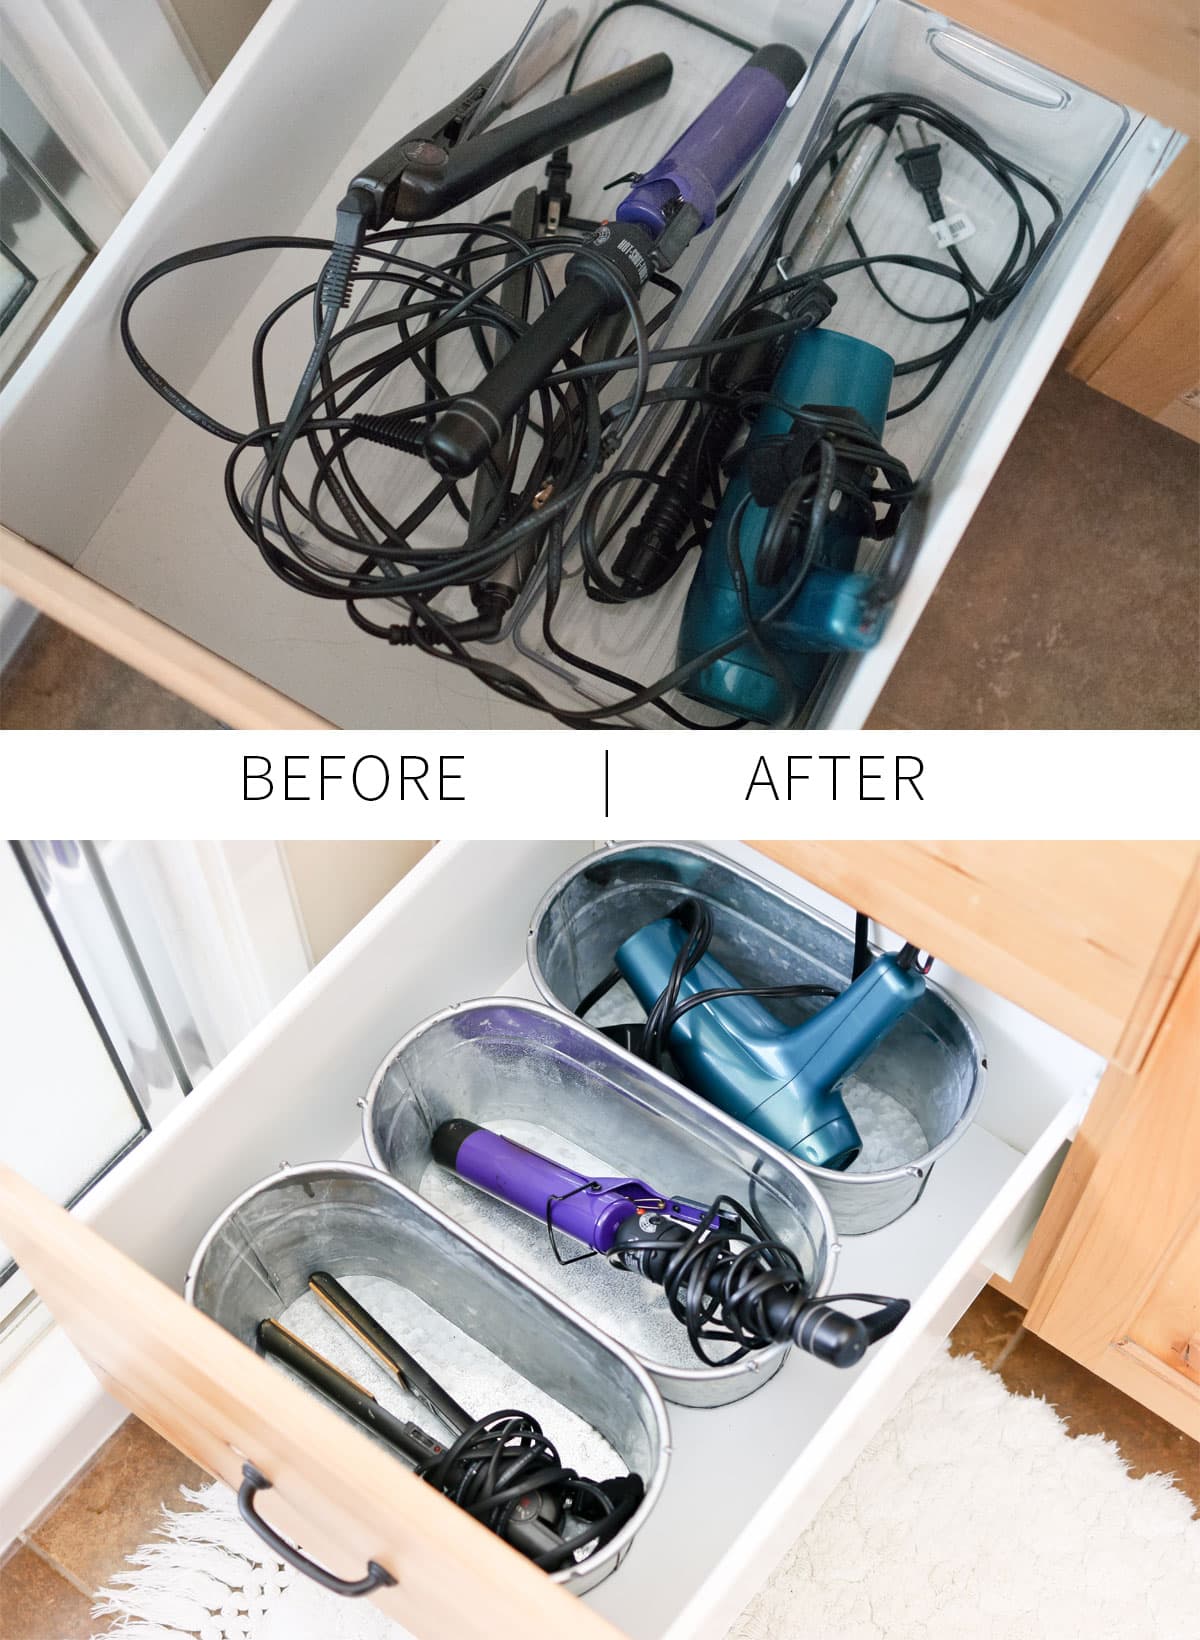 Irons and blow dryer organization